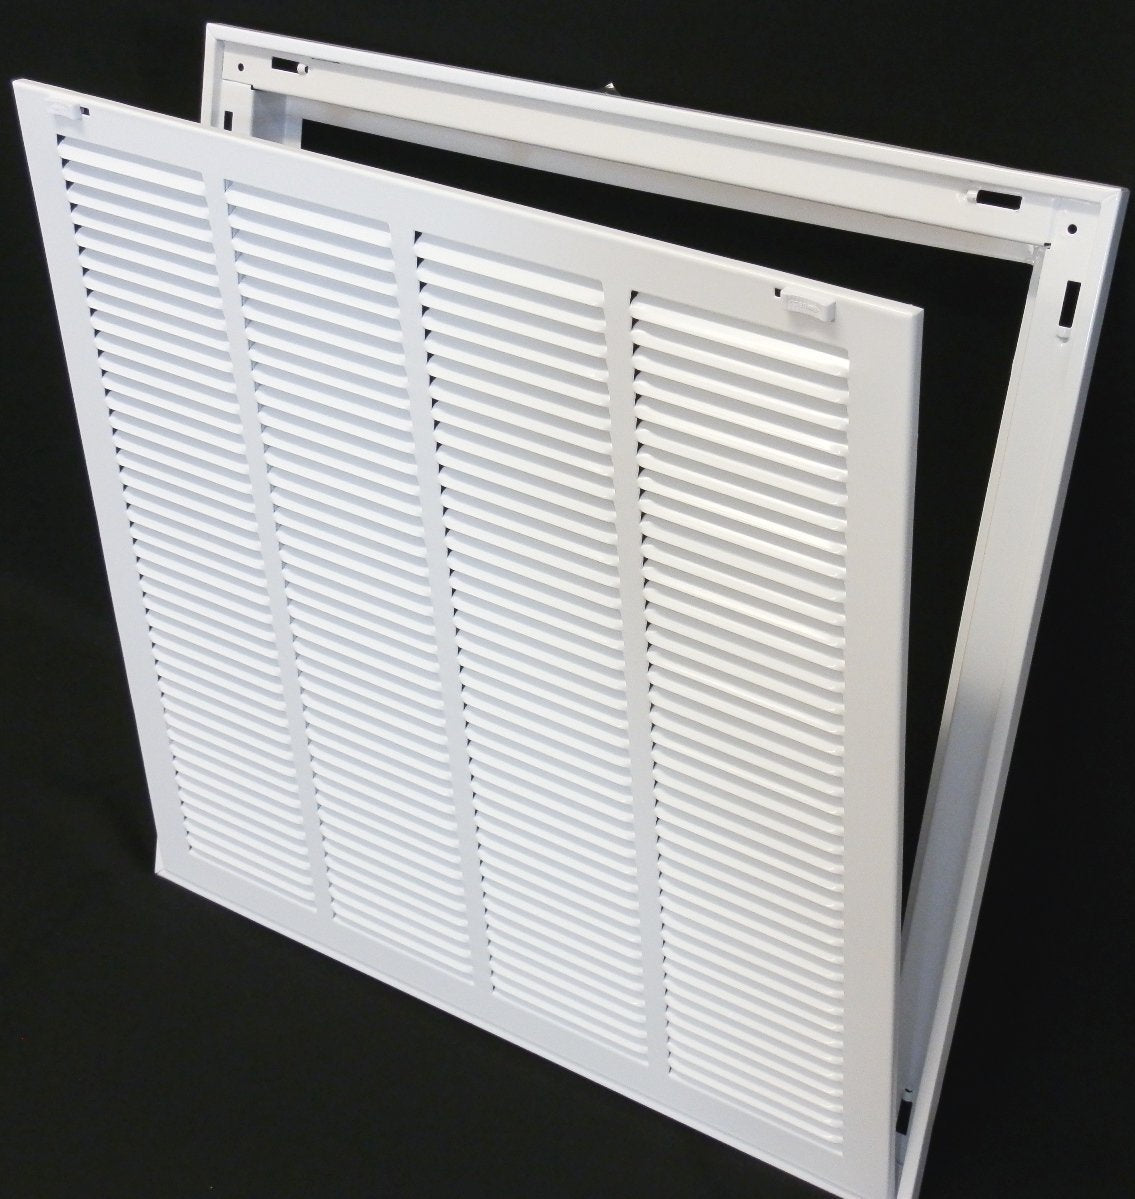 22&quot; X 16&quot; Steel Return Air Filter Grille for 1&quot; Filter - Removable Frame - [Outer Dimensions: 24 5/8&quot; X 18 5/8&quot;]